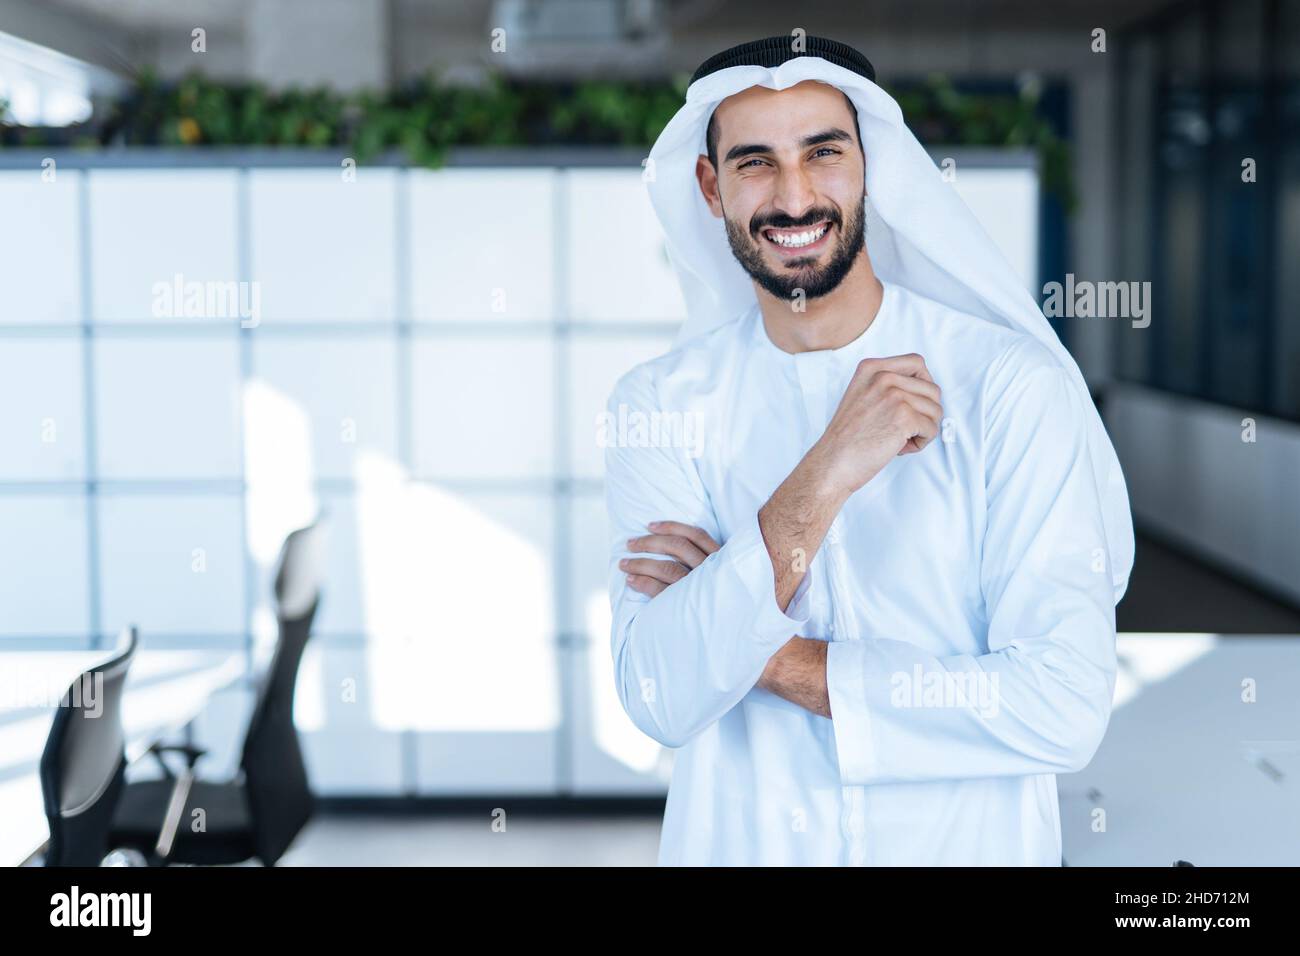 handsome man with dish dasha working in his business office of Dubai. Portraits of a successful businessman in traditional emirates white dress. Stock Photo